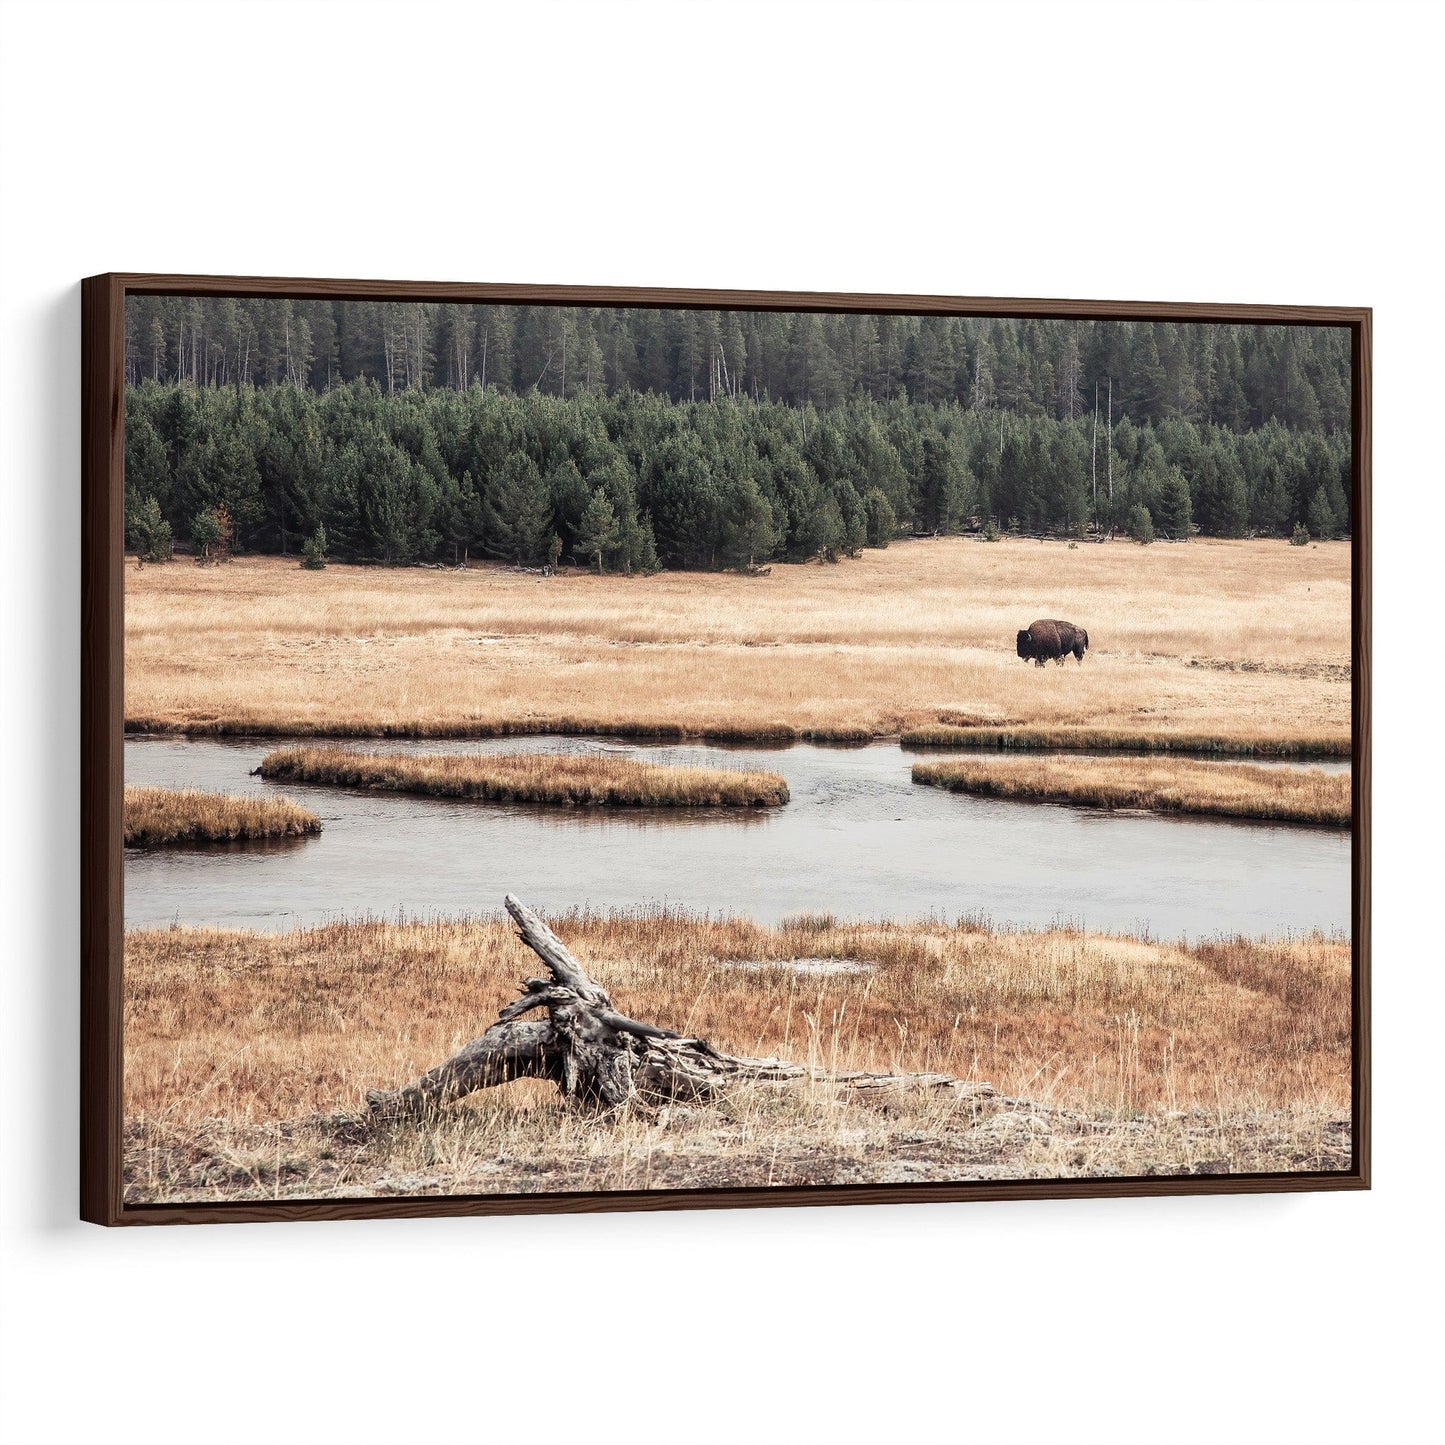 Yellowstone Bison Canvas Art for Over Couch Canvas-Walnut Frame / 12 x 18 Inches Wall Art Teri James Photography